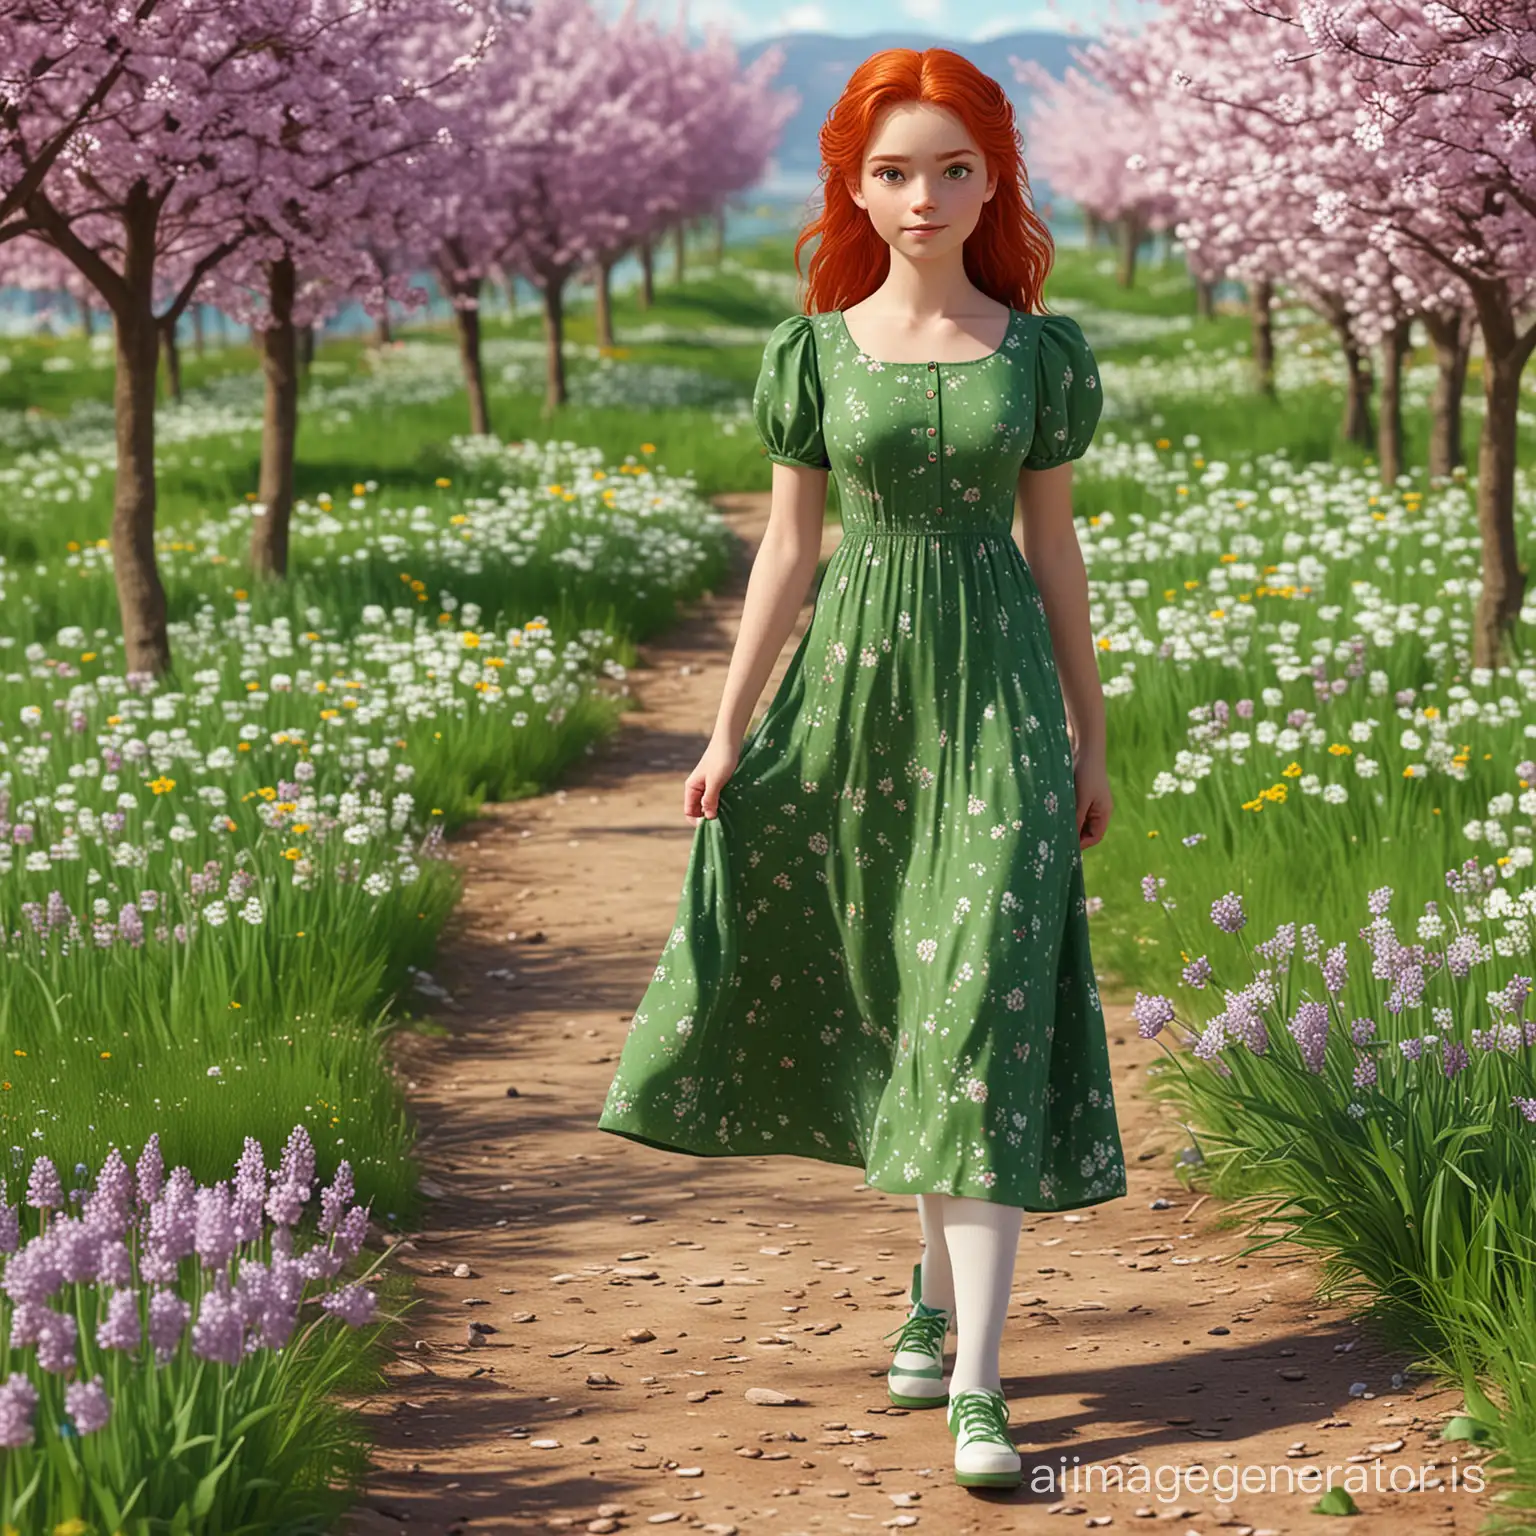 3D graphics: a spring landscape and a girl with green eyes, red hair dressed in a green maxi dress with short sleeves, white tights, purple shoes